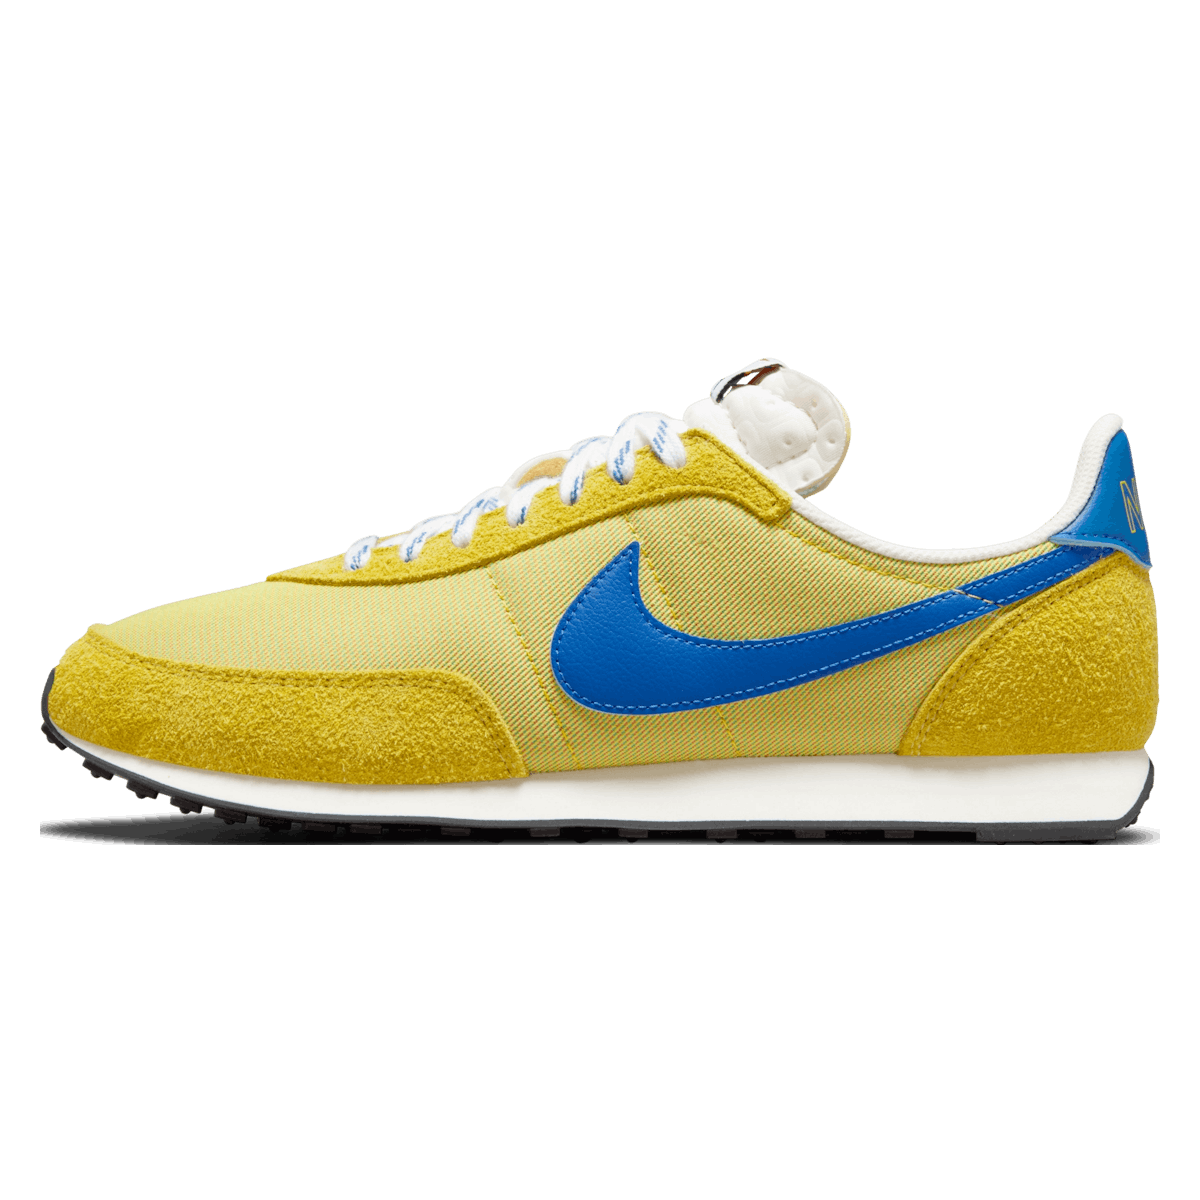 Nike Waffle Trainer 2 SD K2 Ascent